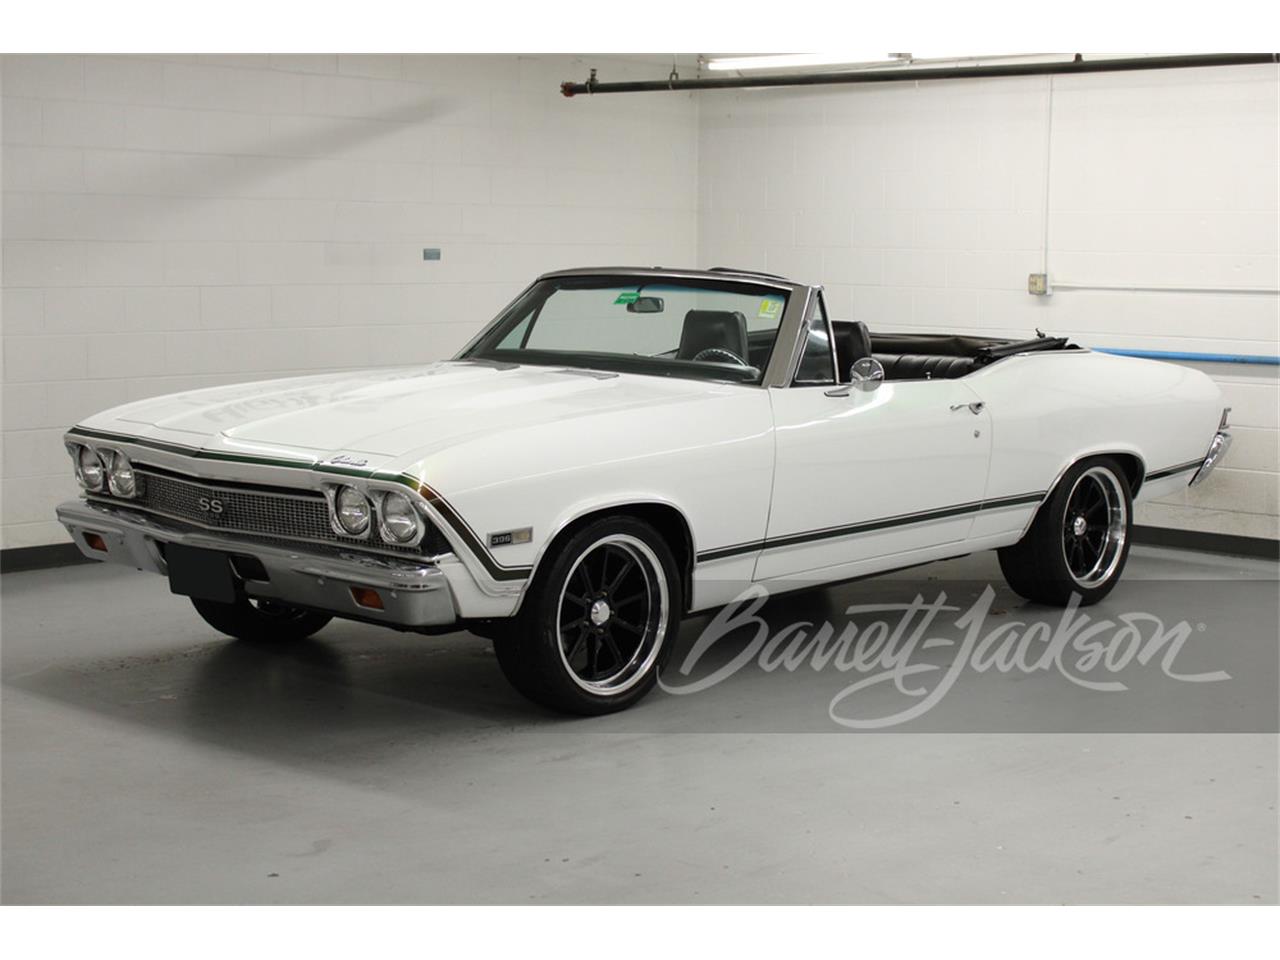 For Sale at Auction: 1968 Chevrolet Chevelle in Scottsdale, Arizona for sale in Scottsdale, AZ